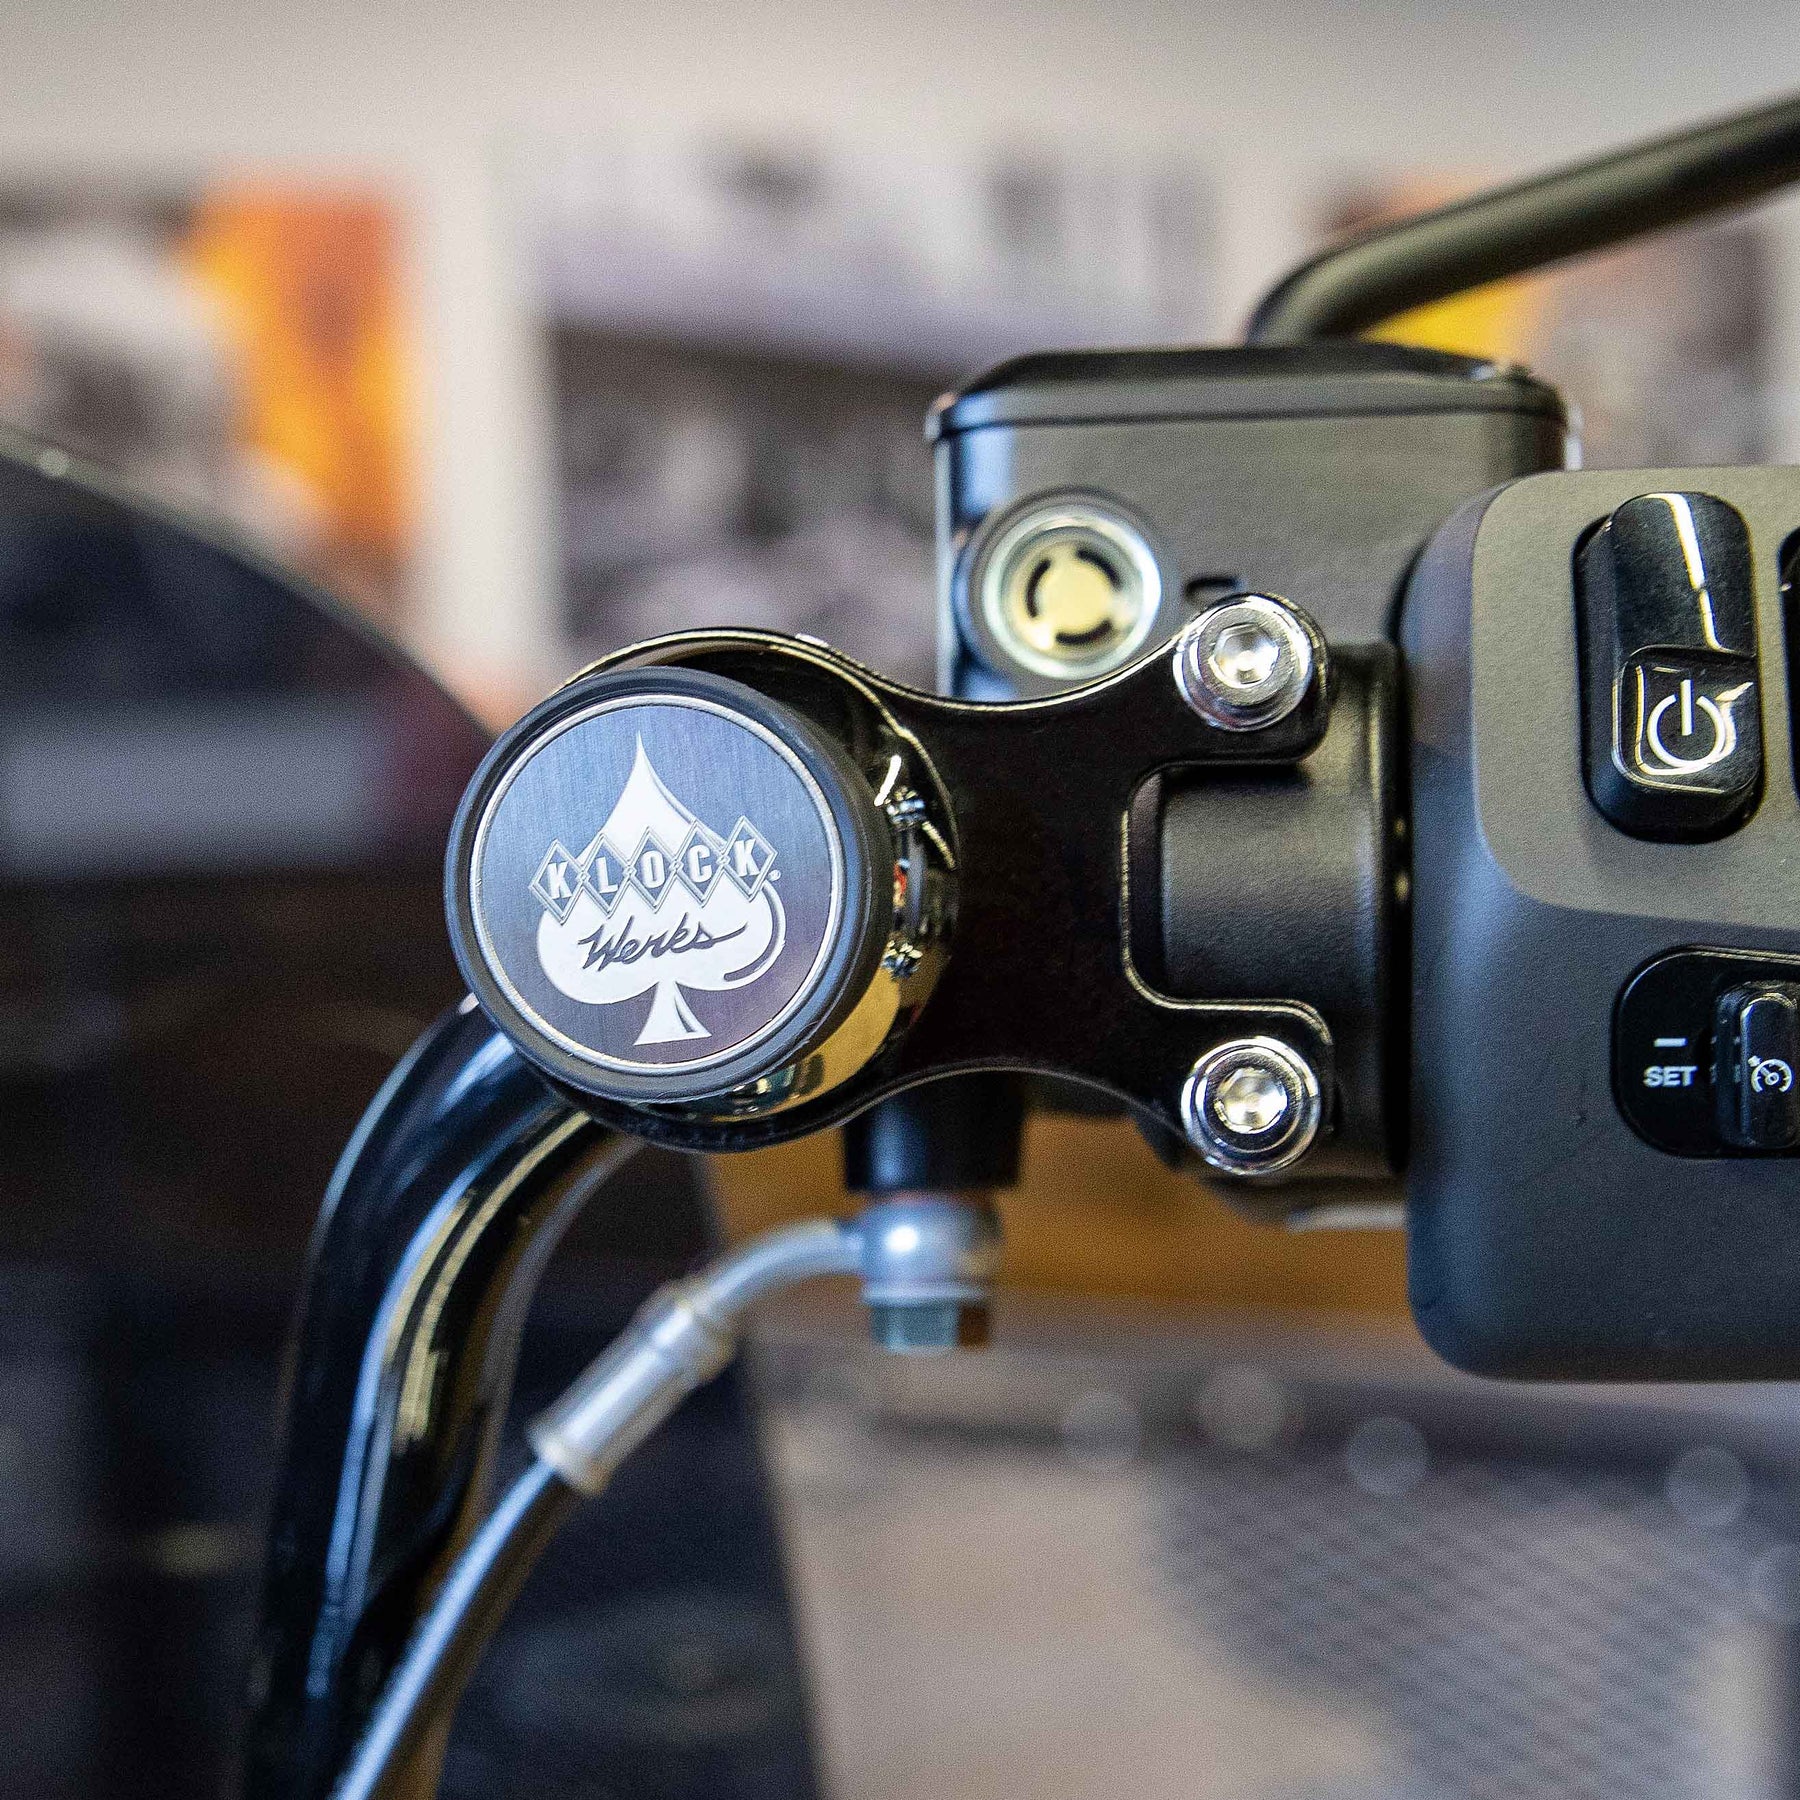 Black Ambidextrous Handlebar Magnetic Phone Mount for Indian® Scout® Motorcycles shown on bike